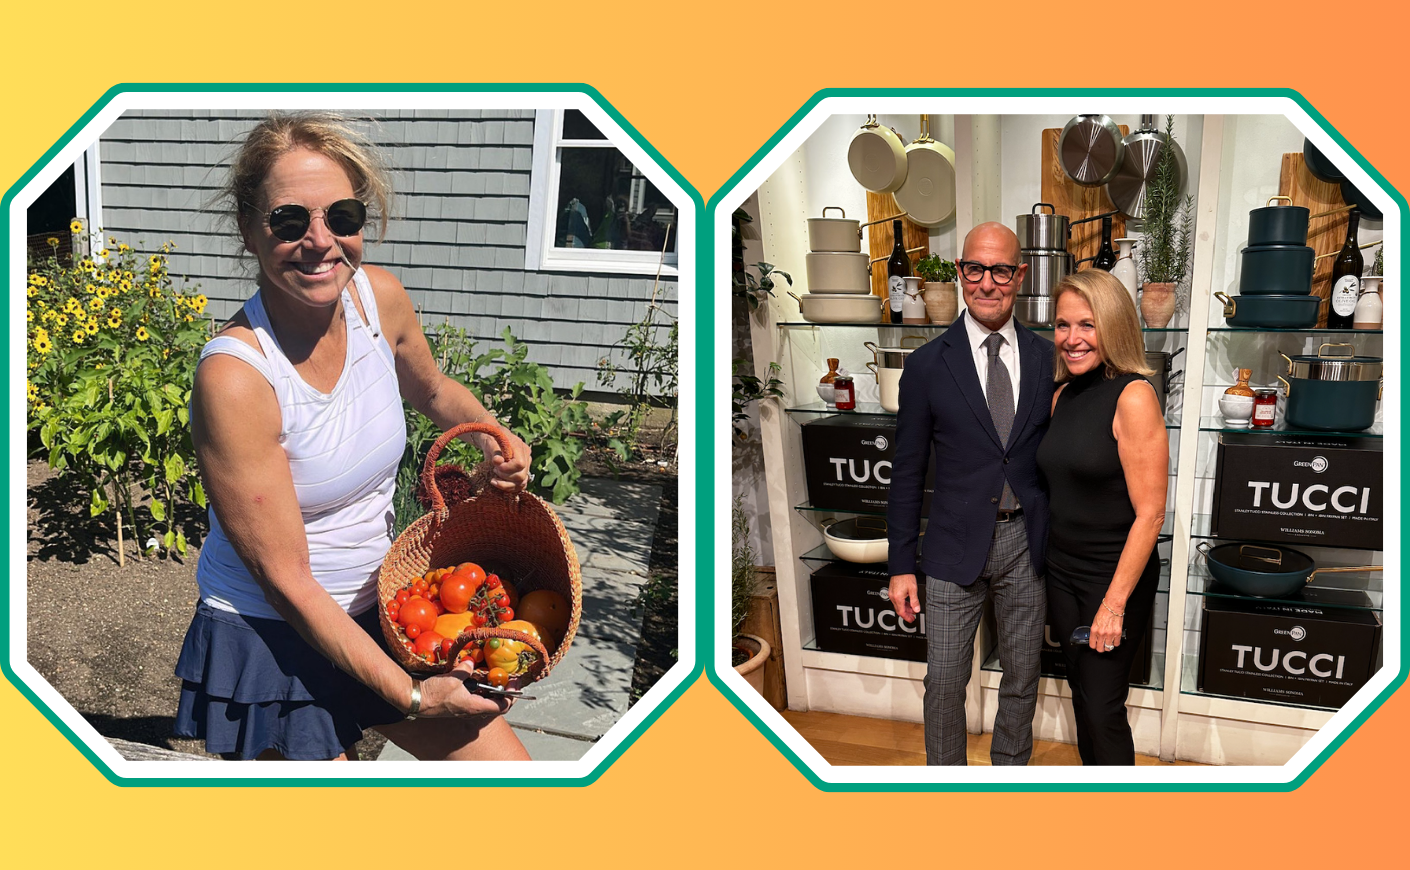 katie couric holding a basket of tomatoes and another photo with stanley tucci